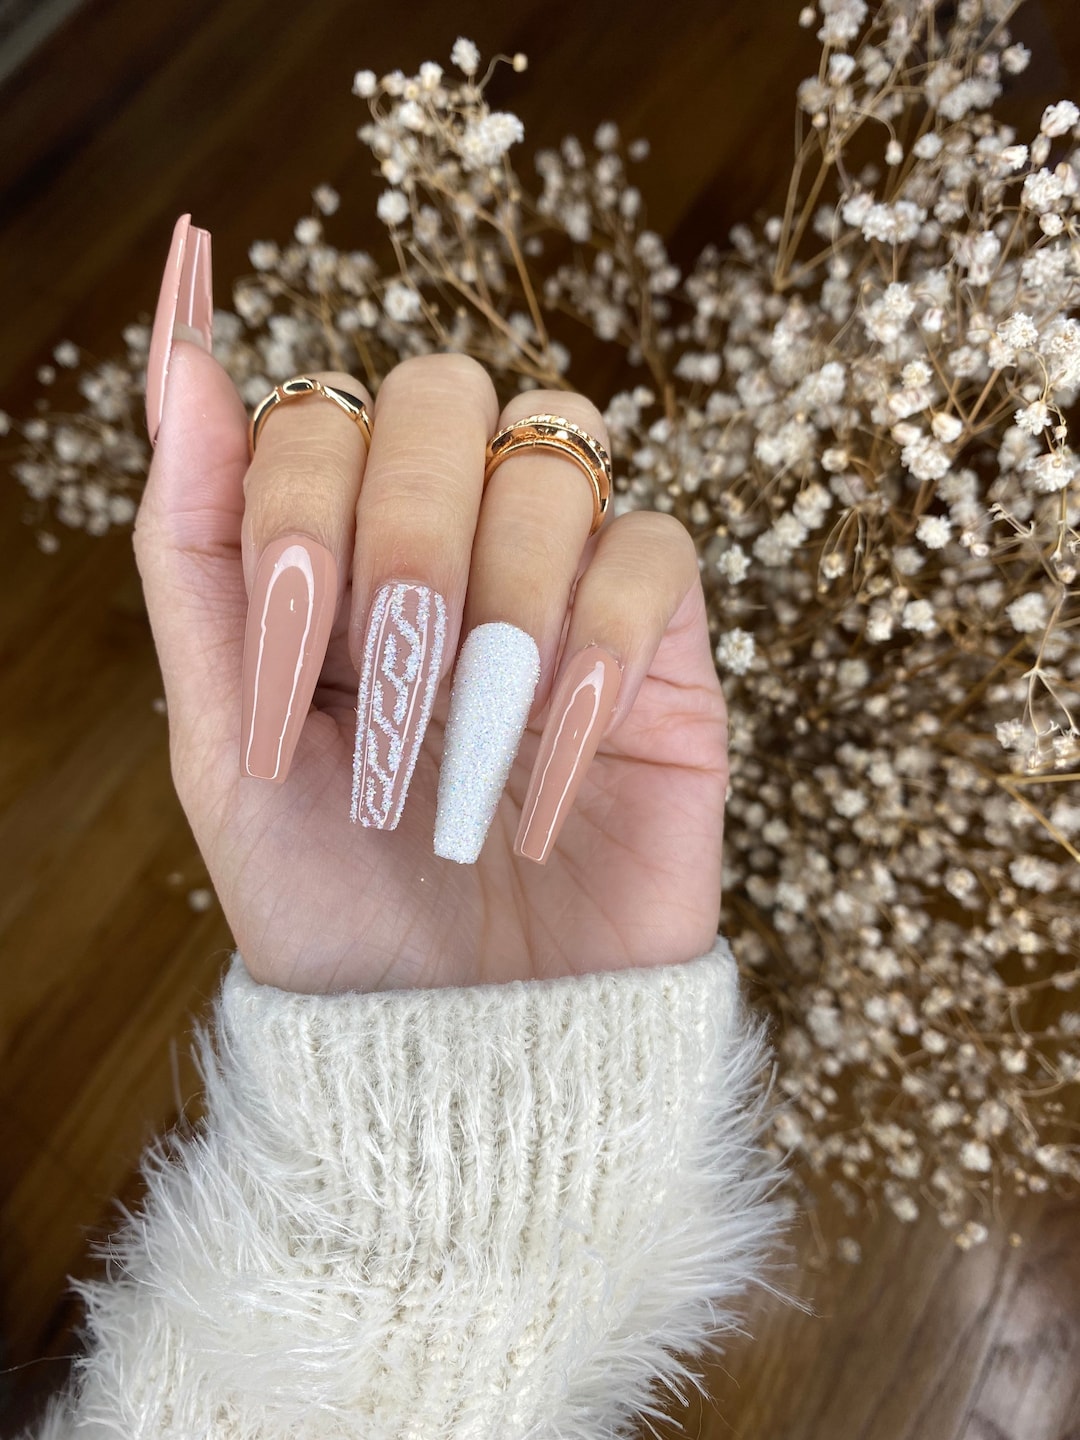 25 Chic Coffin Nail Designs For Your Next Manicure